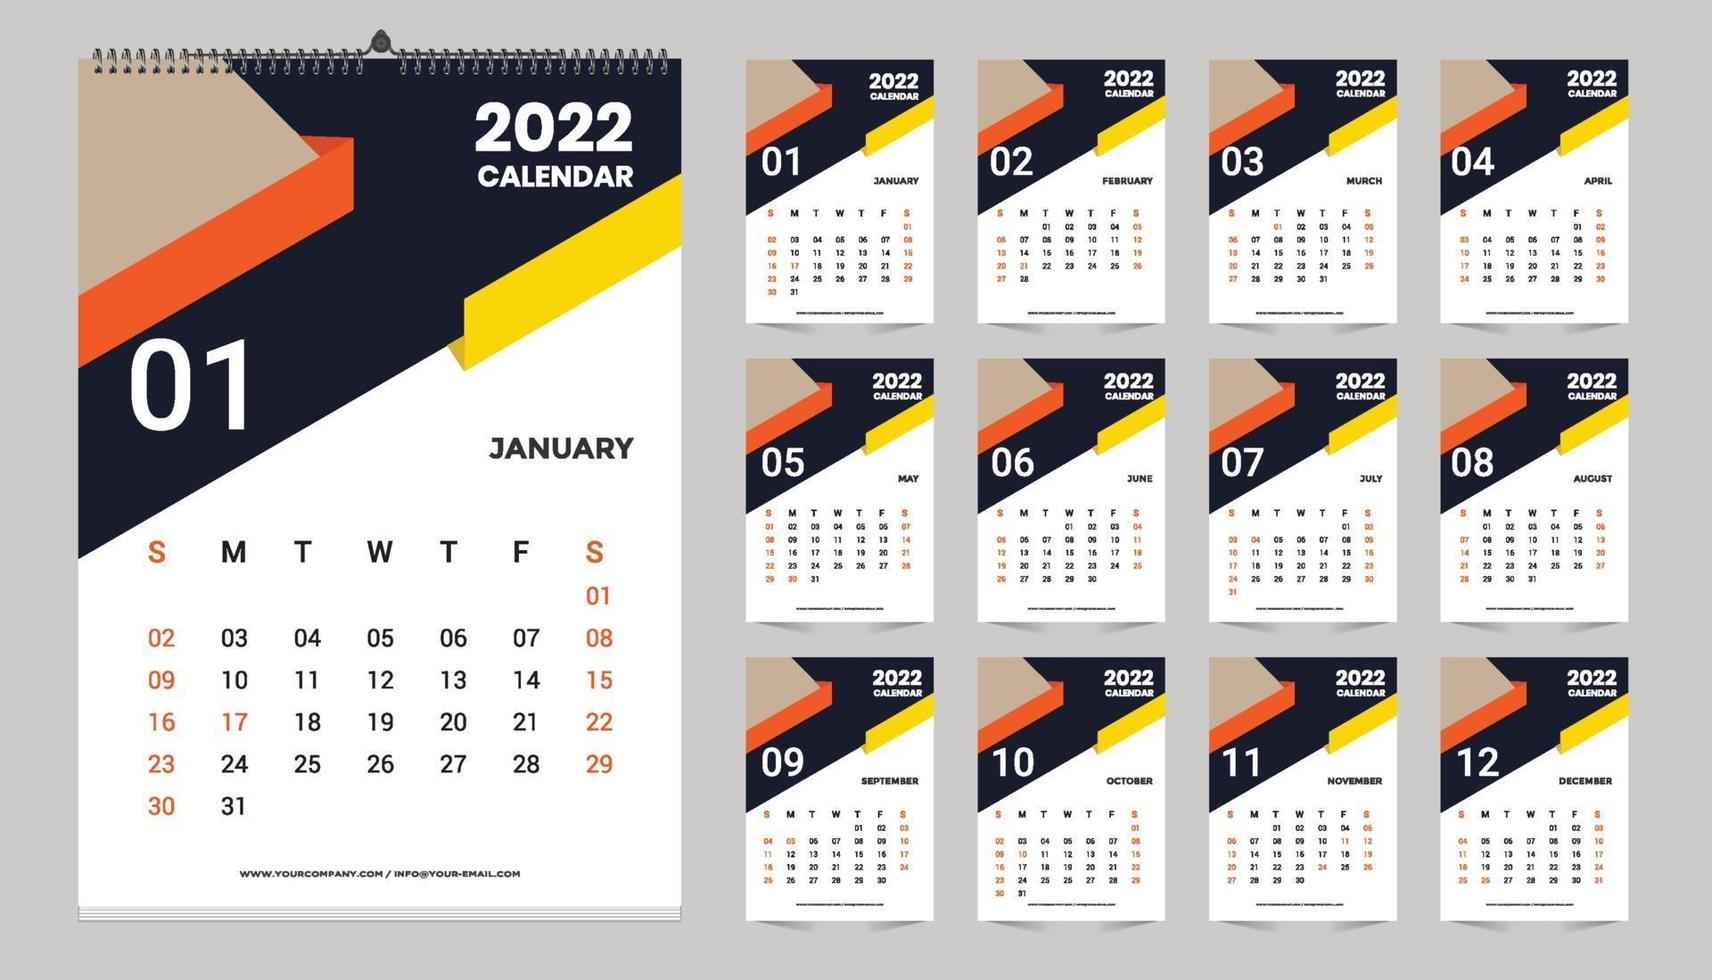 How To Start Your Year with An Attractive Calendar?